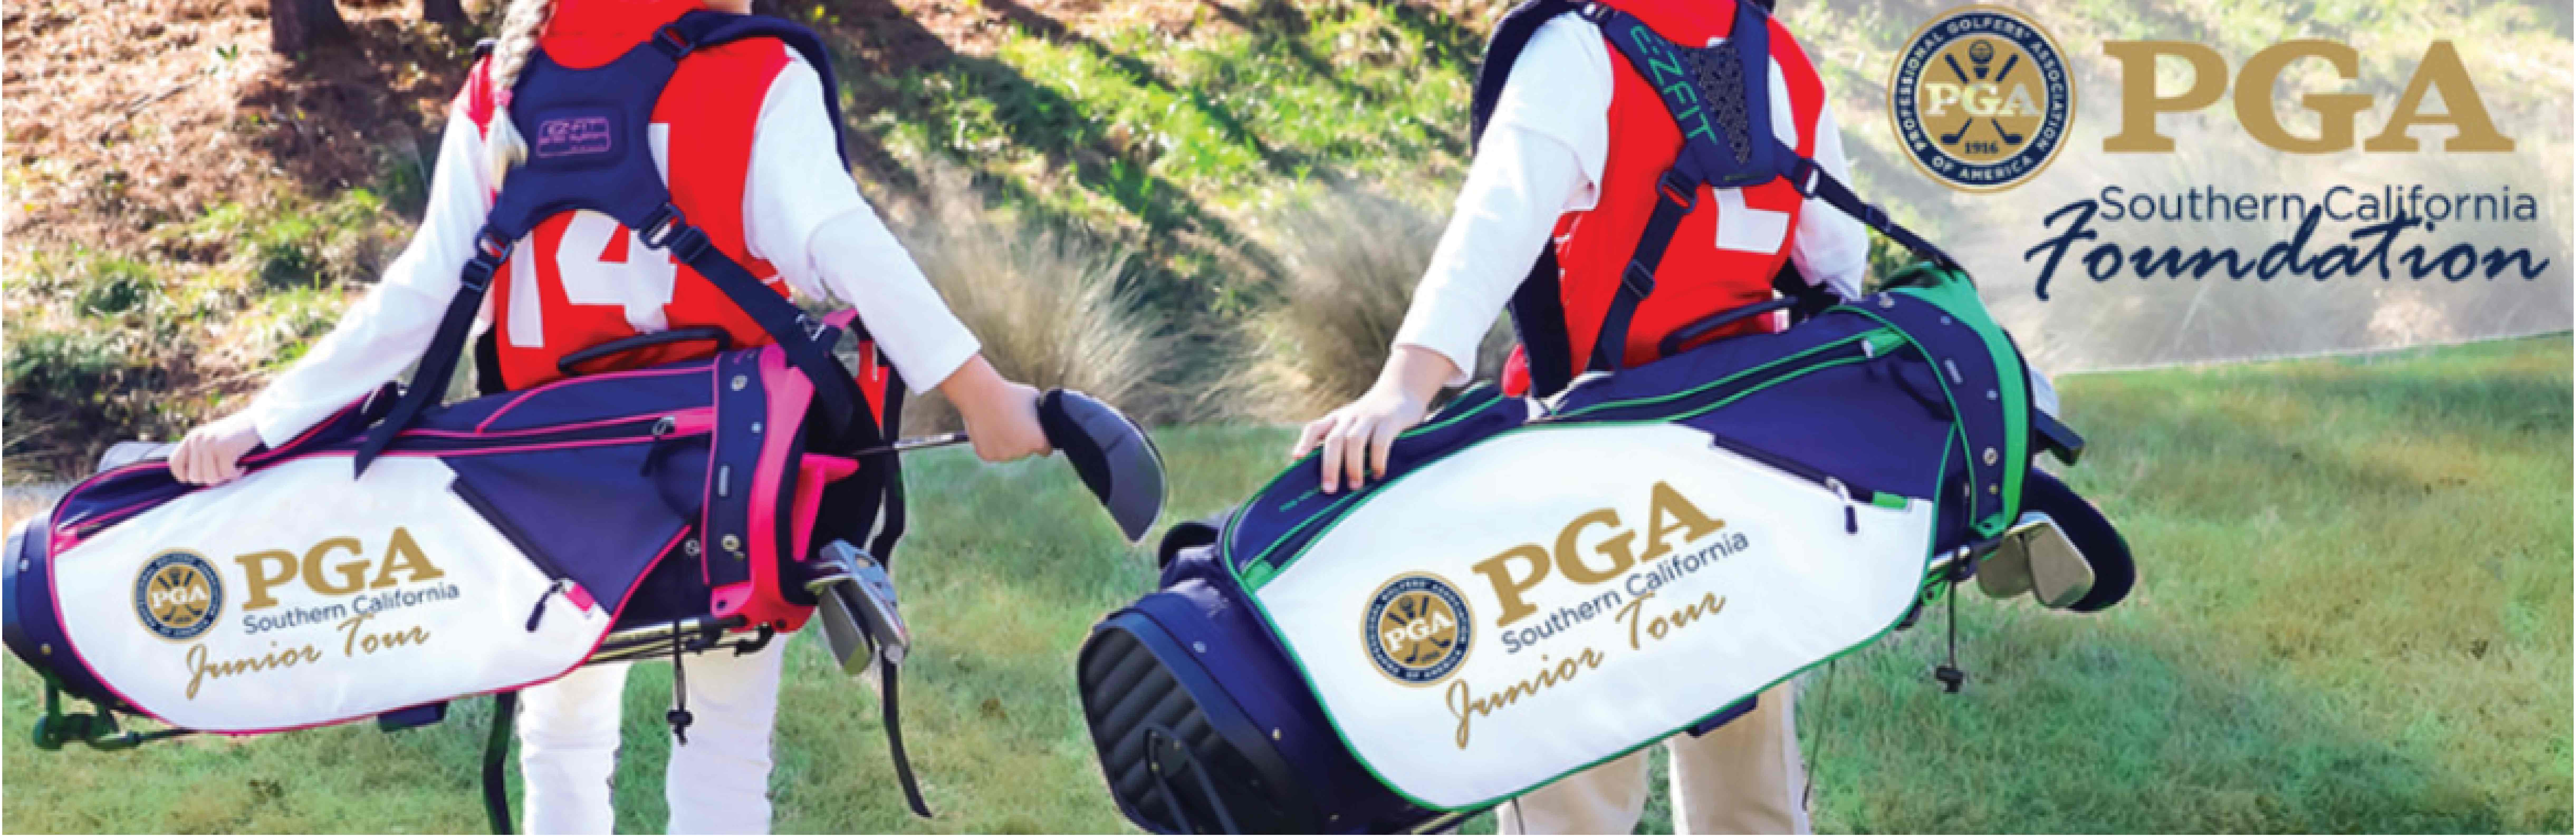 Youths with PGA Southern California Golf Bags